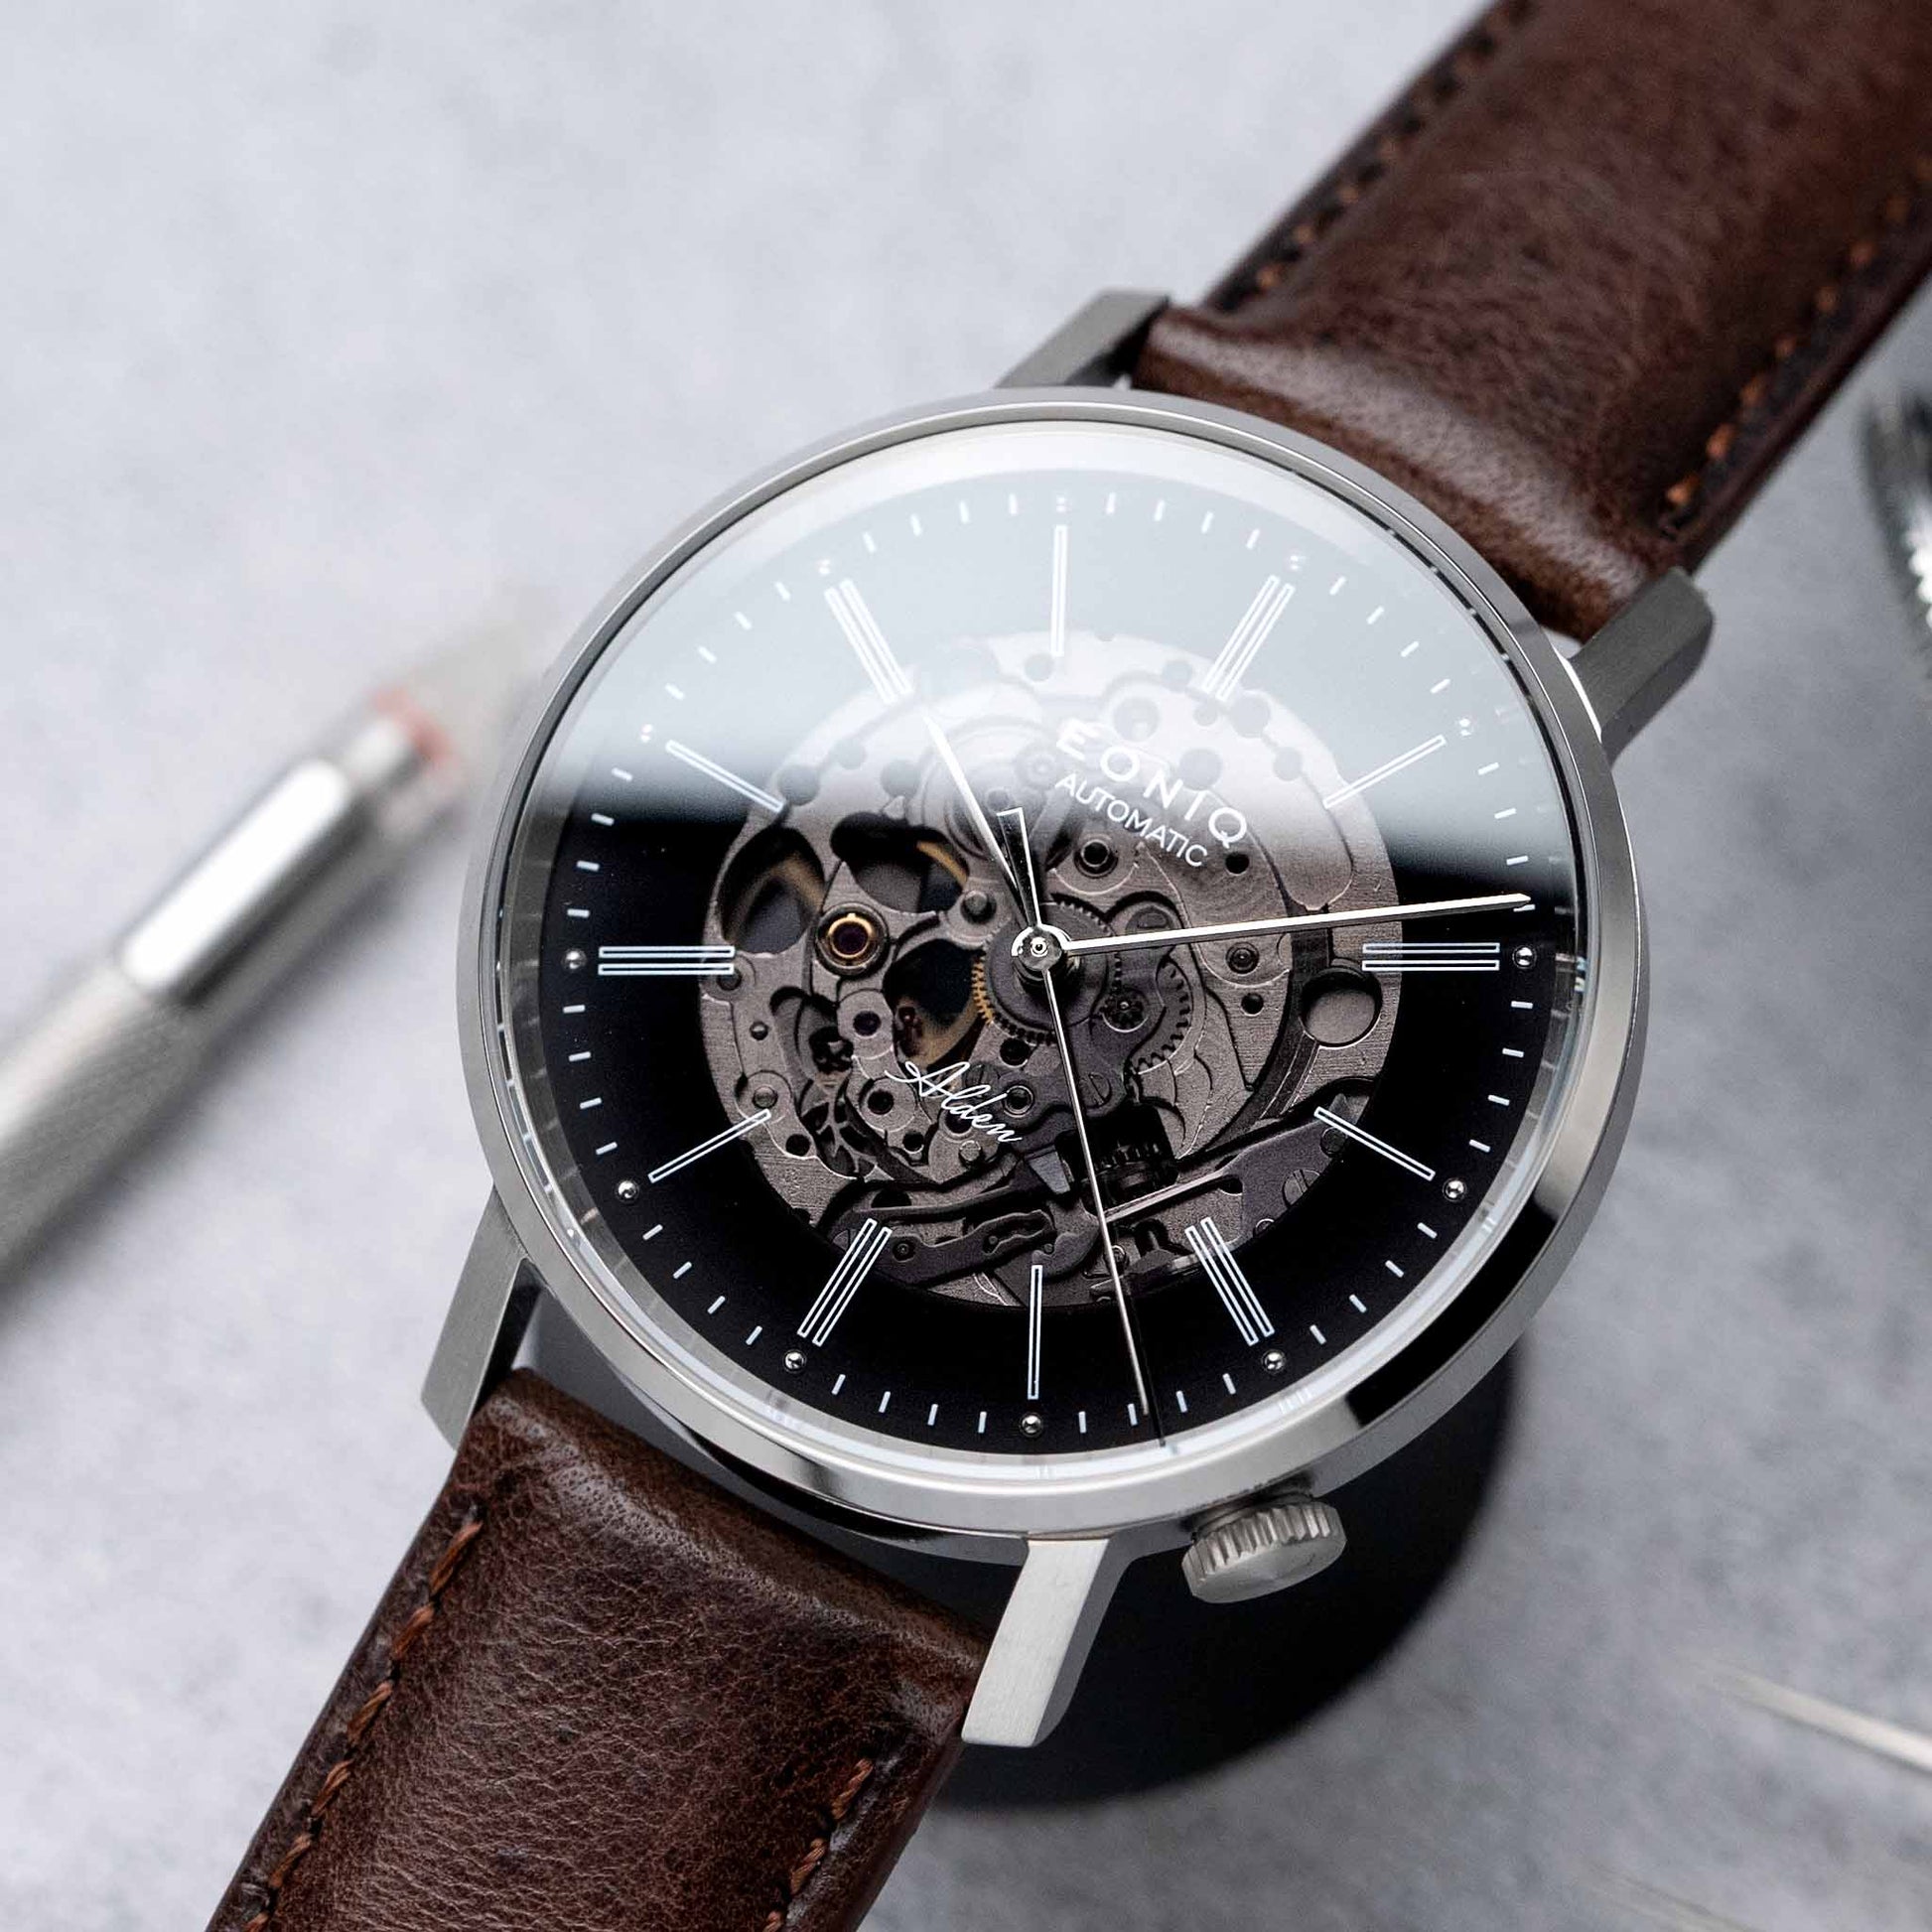 EONIQ custom watch - ALSTER series with sapphire dial and brown strap - silver case